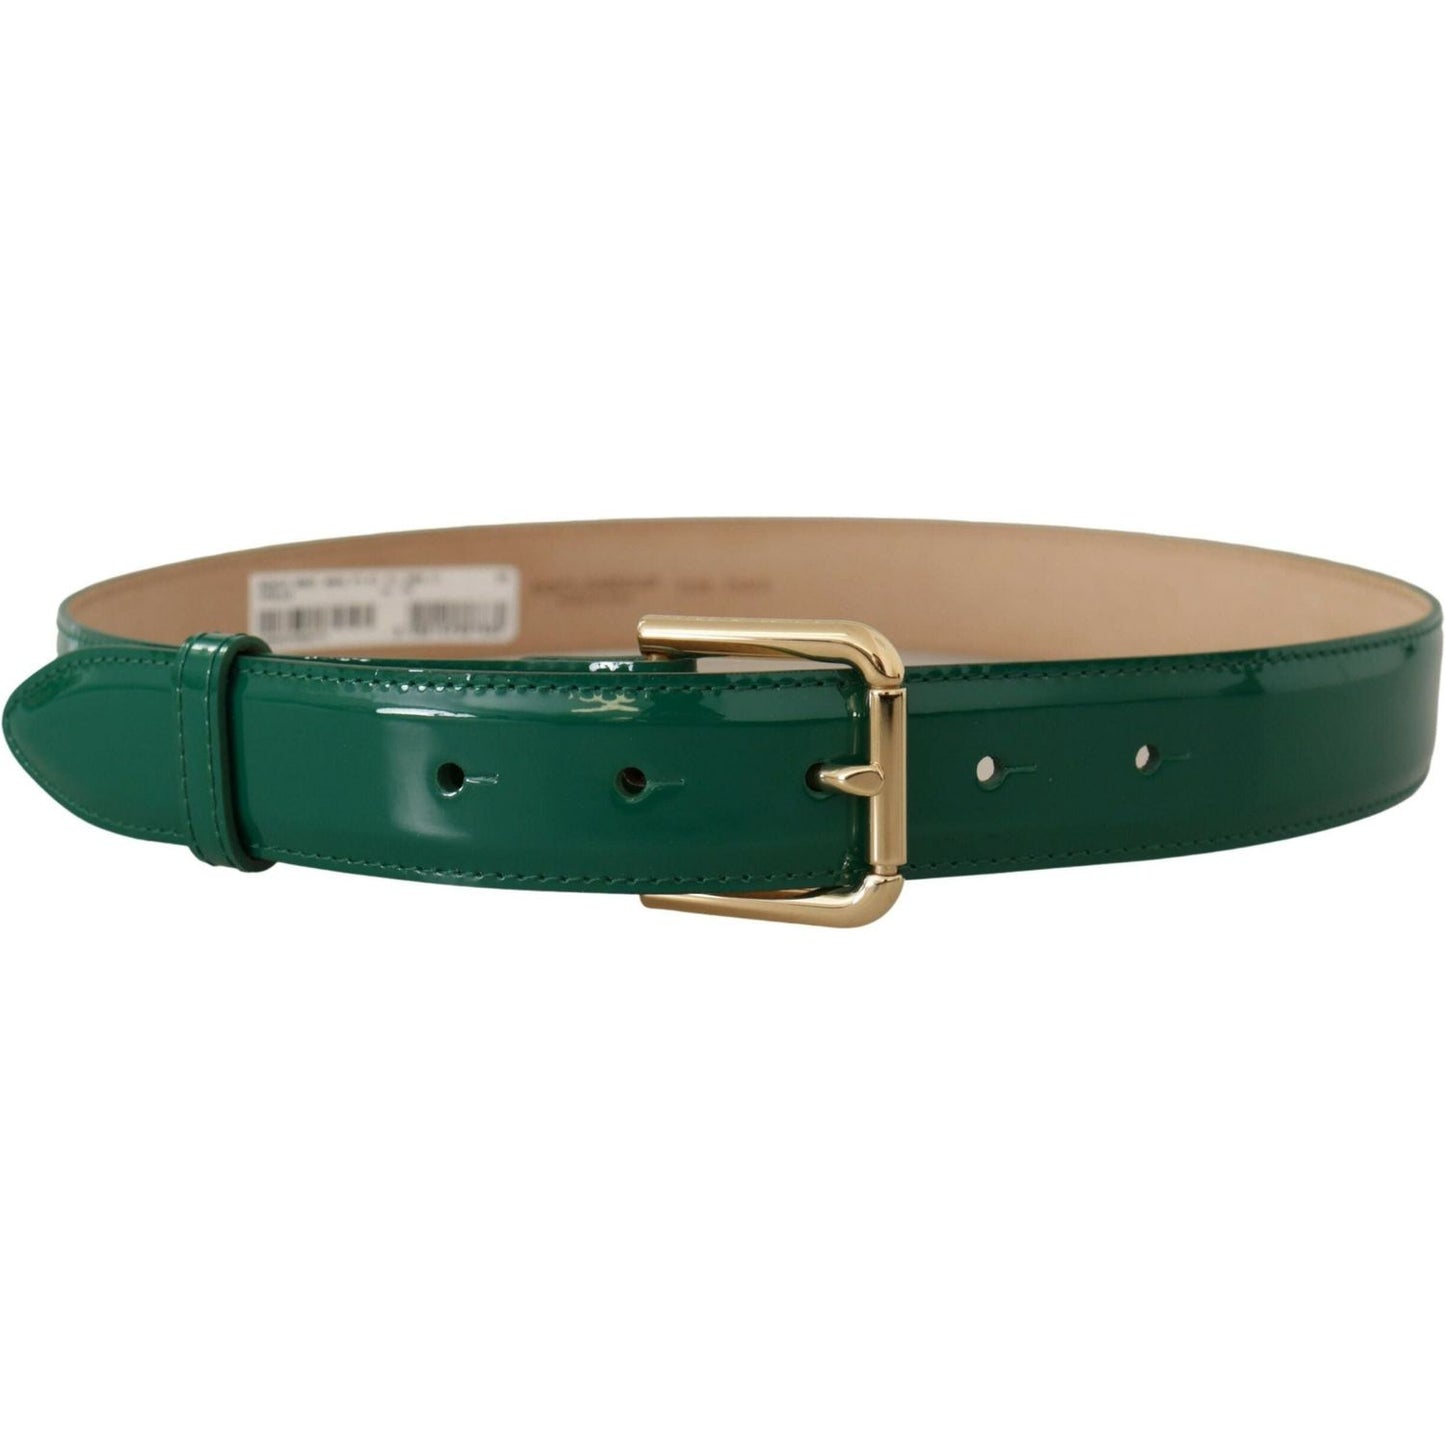 Dolce & Gabbana Elegant Green Leather Belt with Gold Buckle Detail green-patent-leather-logo-engraved-buckle-belt IMG_8005-2-scaled-ac5f021c-73c.jpg